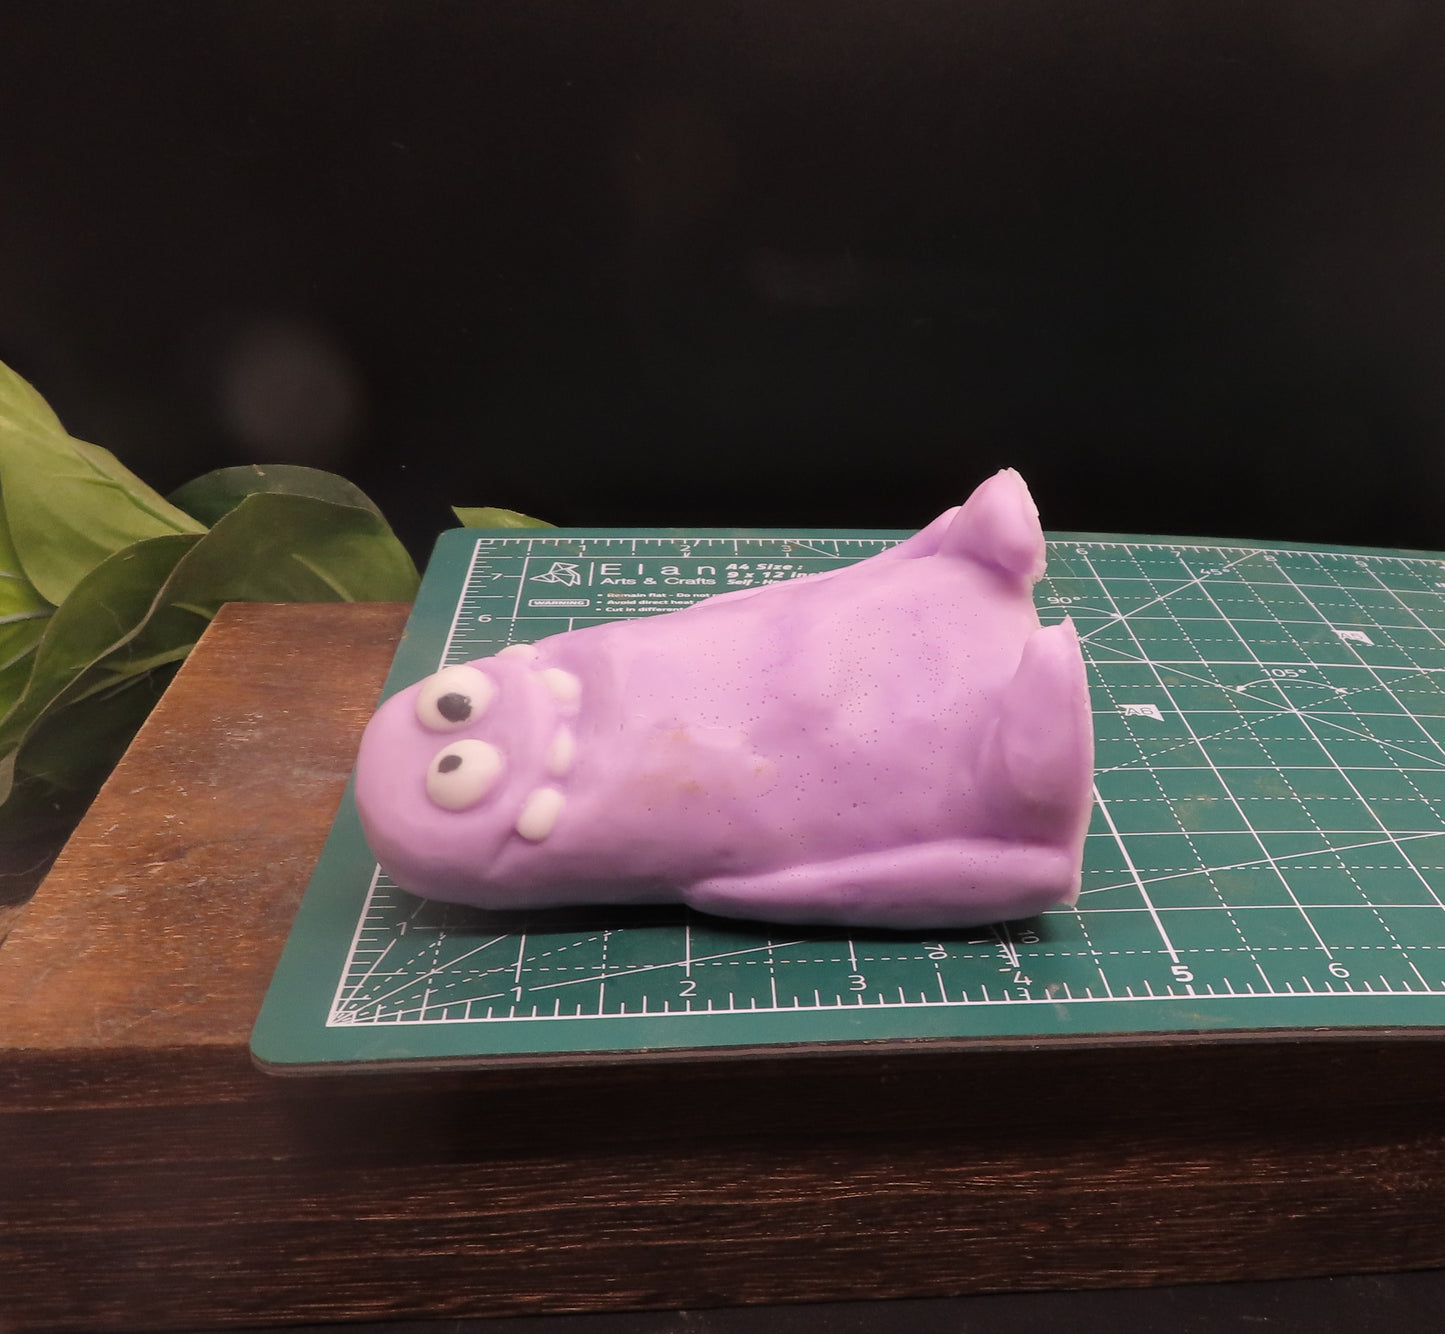 tallest handmade clay monster handade soap is 4.5 inches tall. unique gift